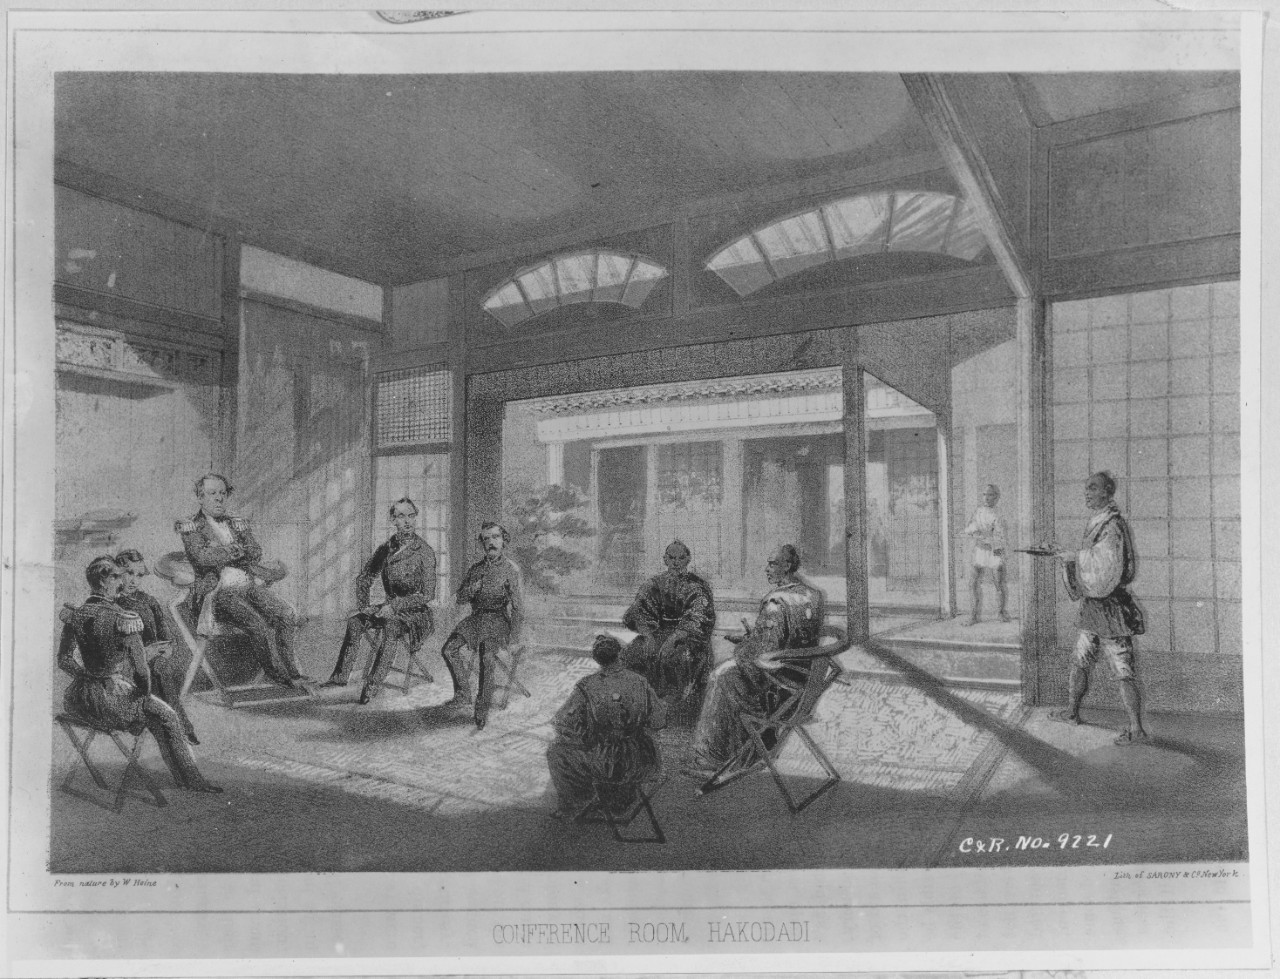 Commodore Perry in Japan. Conference Room,  Hakodadi, March 1854